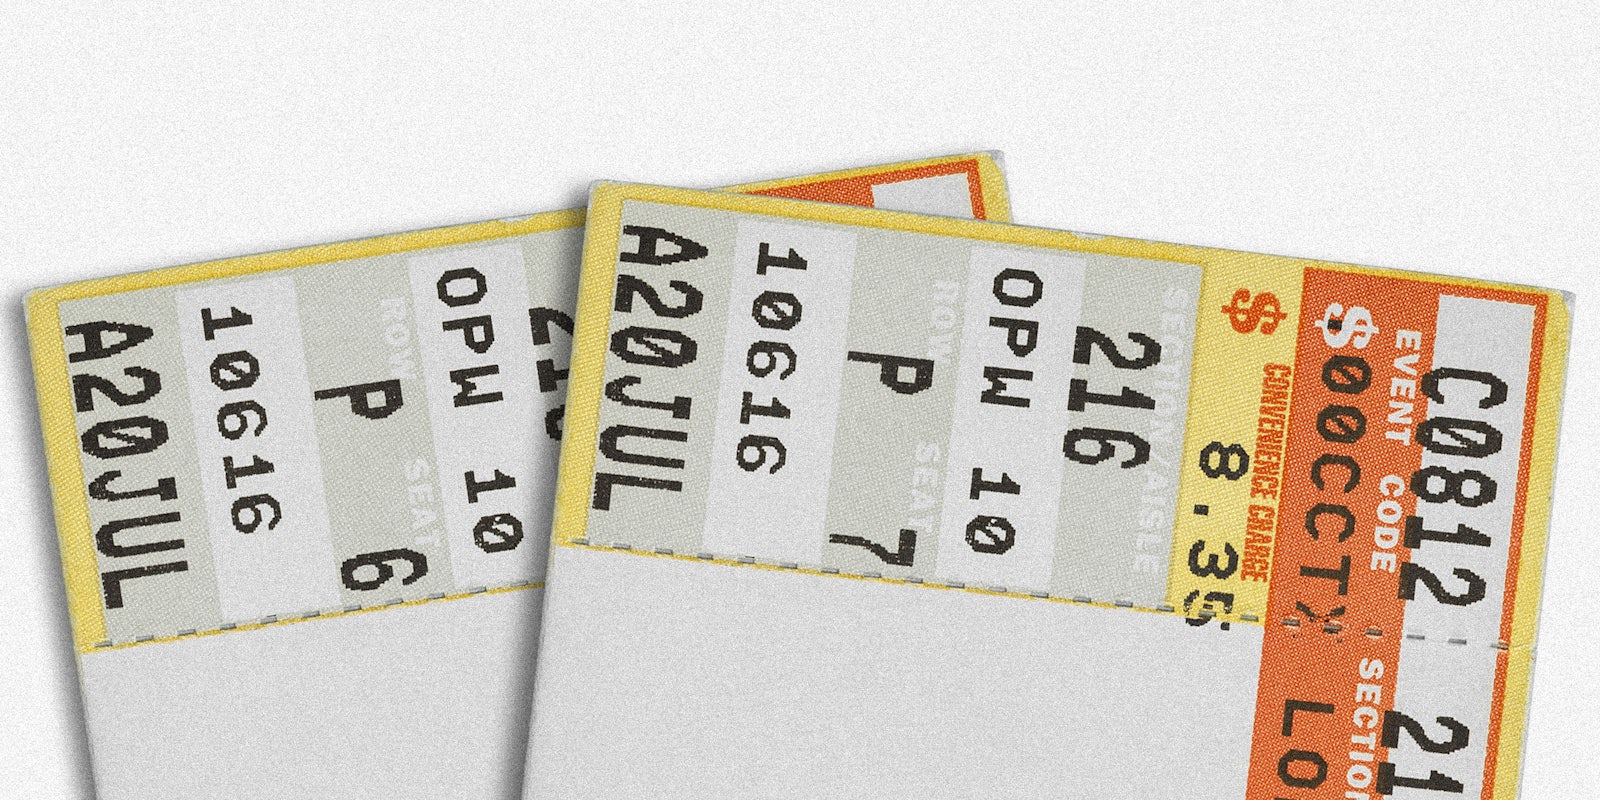 A pair of concert tickets.